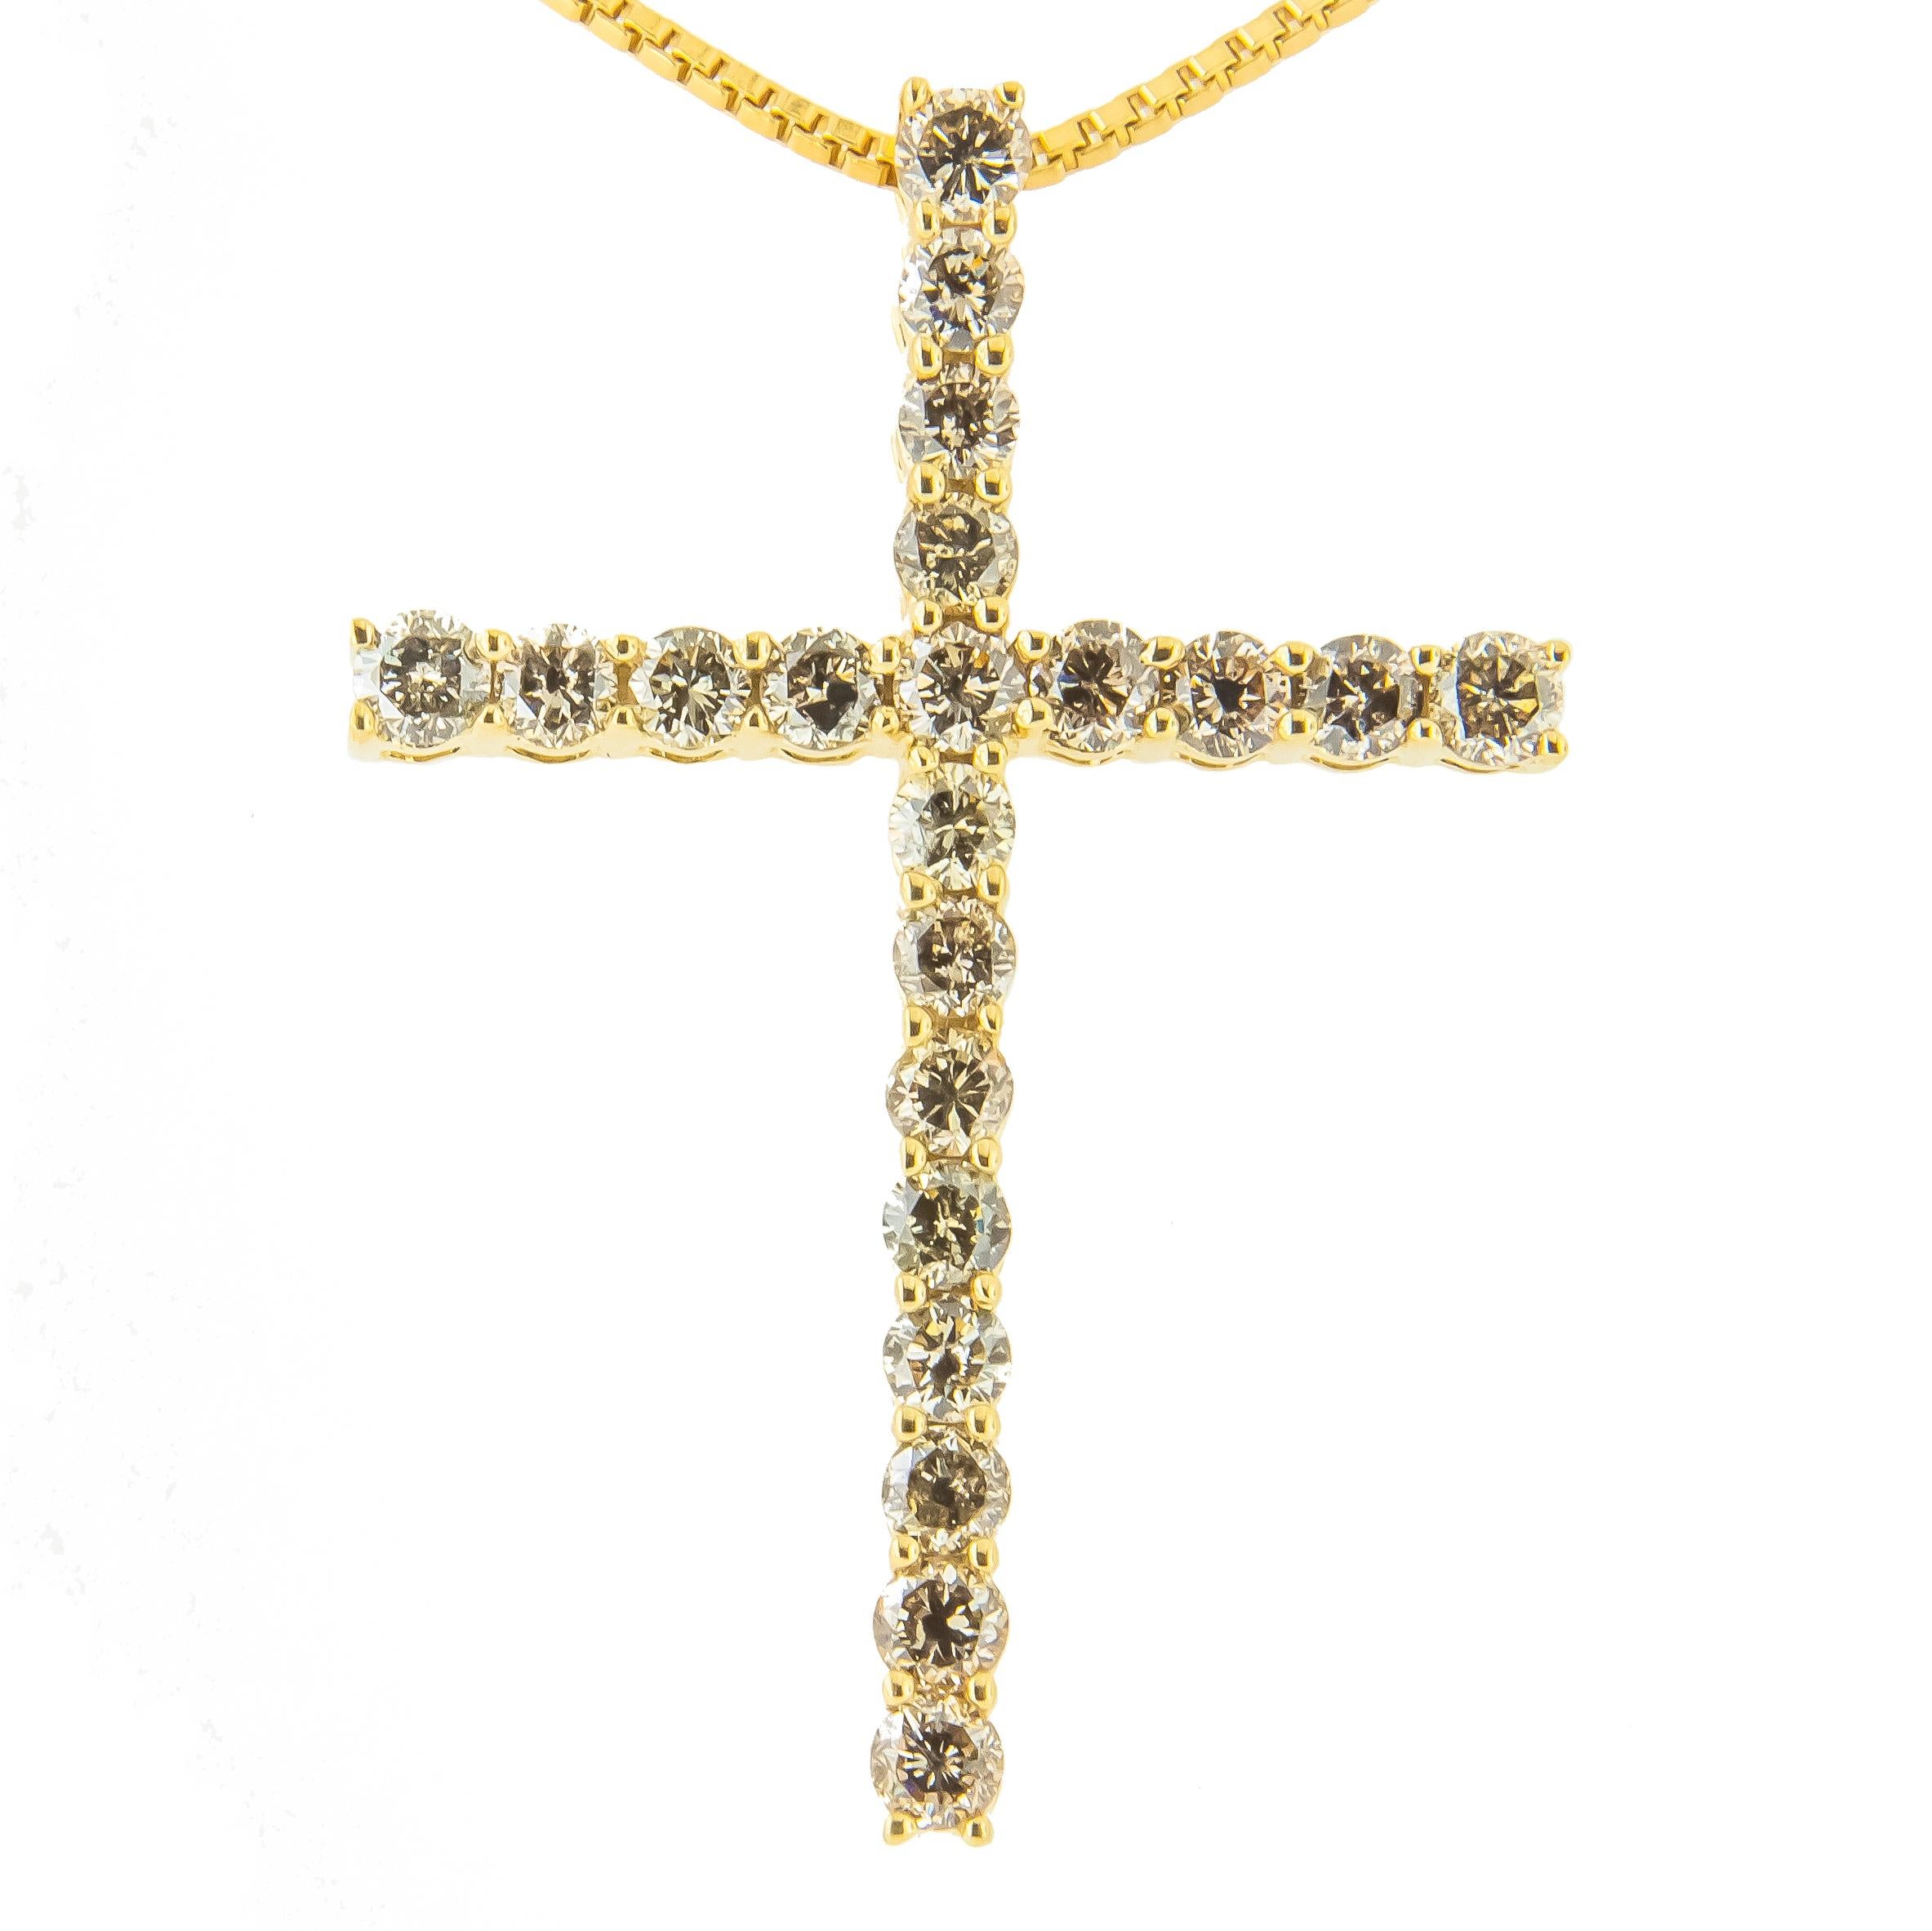 Embrace your spirituality with this sparkling 14kt yellow gold plated 925 sterling silver cross necklace. This pendant is embellished with 21 champagne color diamonds in classic shared prong settings. The diamonds are round-cut and have a total